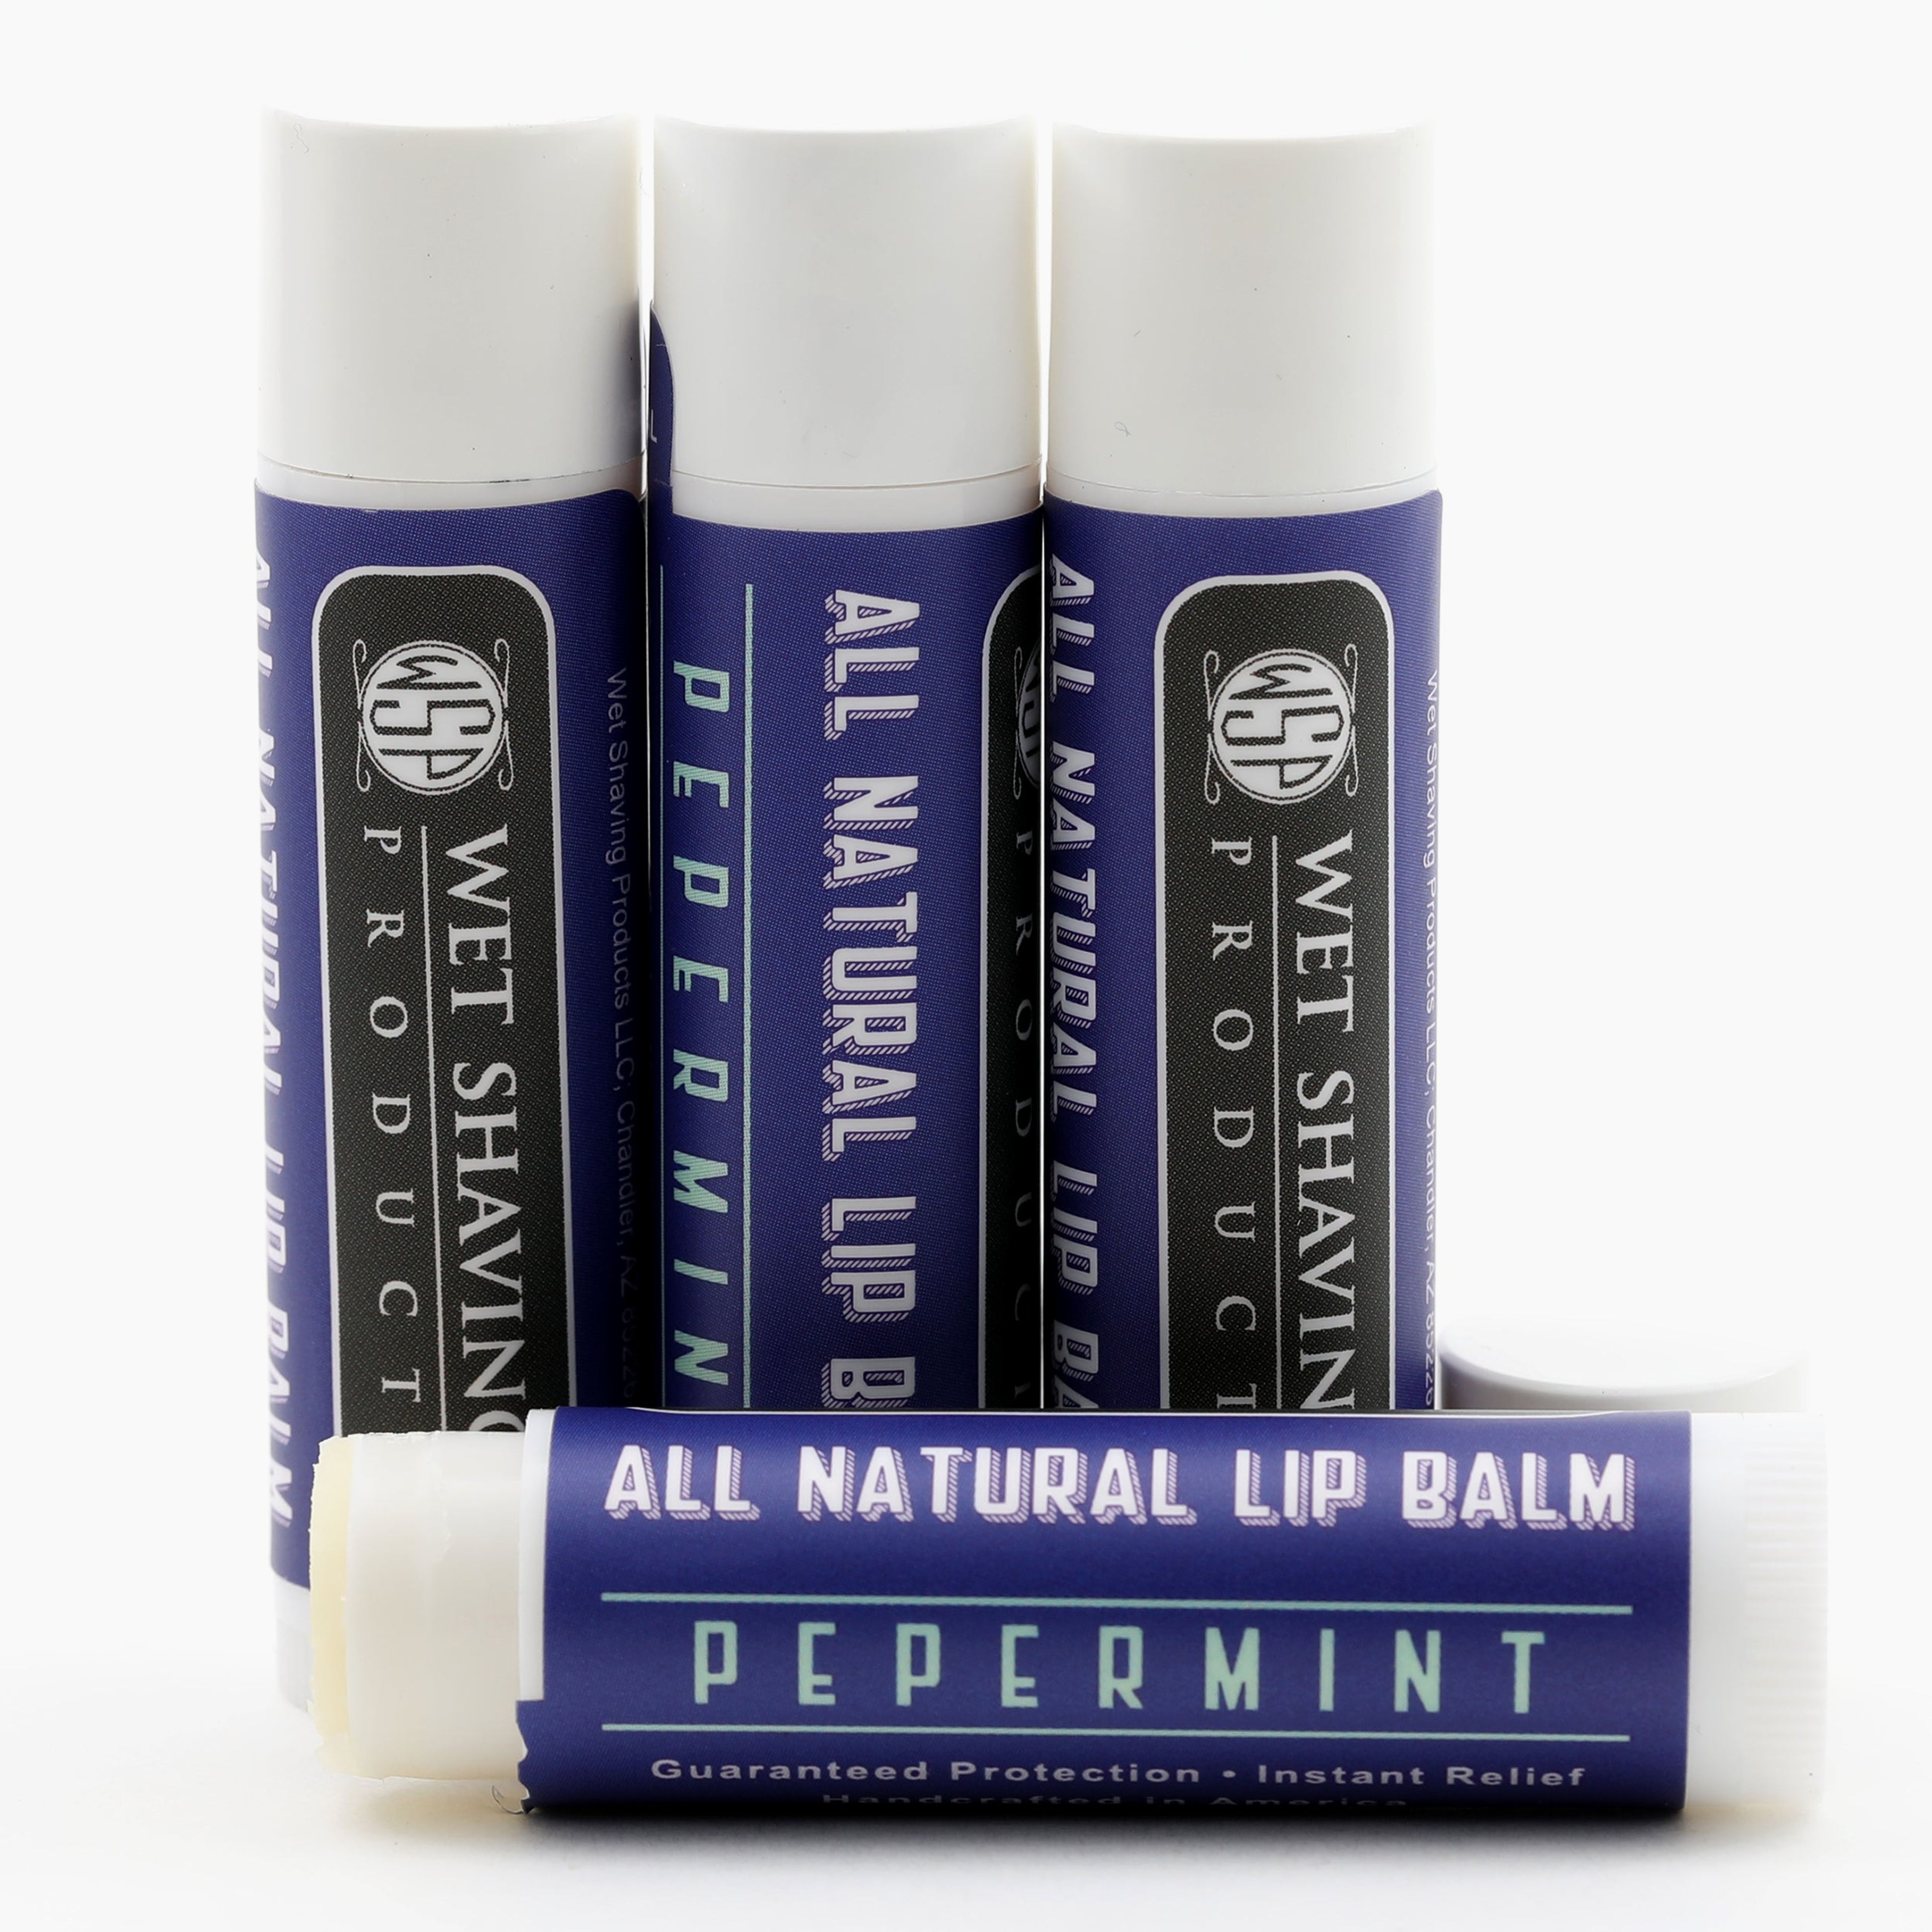 Blue Collar Lip Balm - All Natural Relief for Chapped Lips - Peppermint Flavored